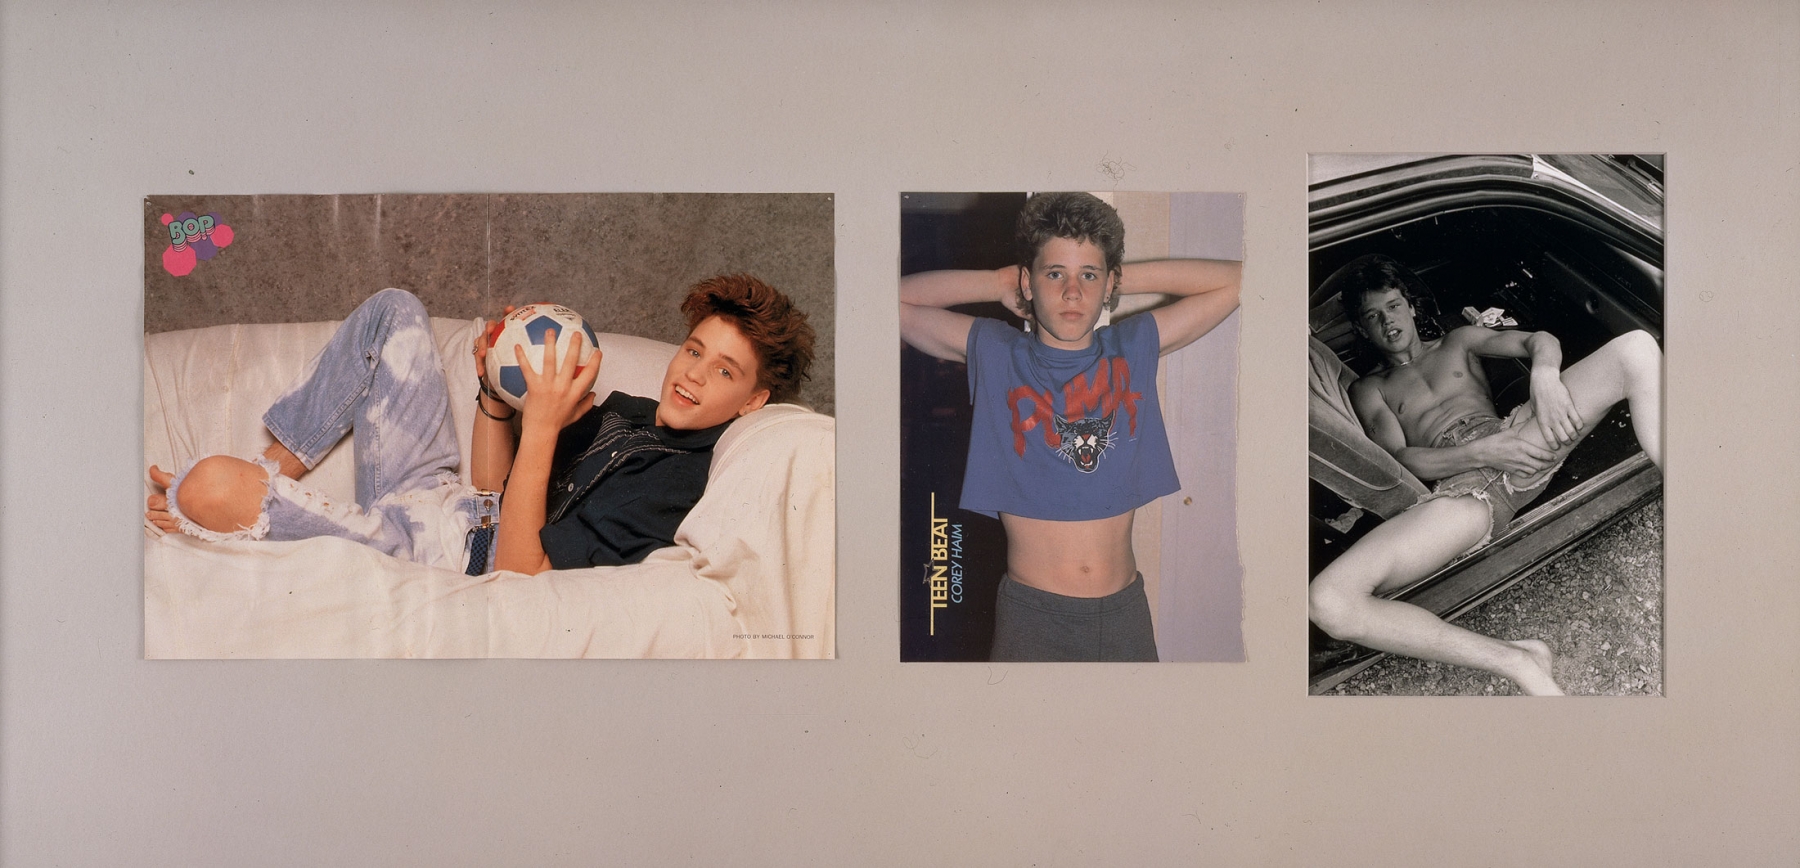 Larry Clark
Untitled, 1989
Photo-collage
21 5/8 x 43 1/2 inches
(54.93 x 110.49 cm)